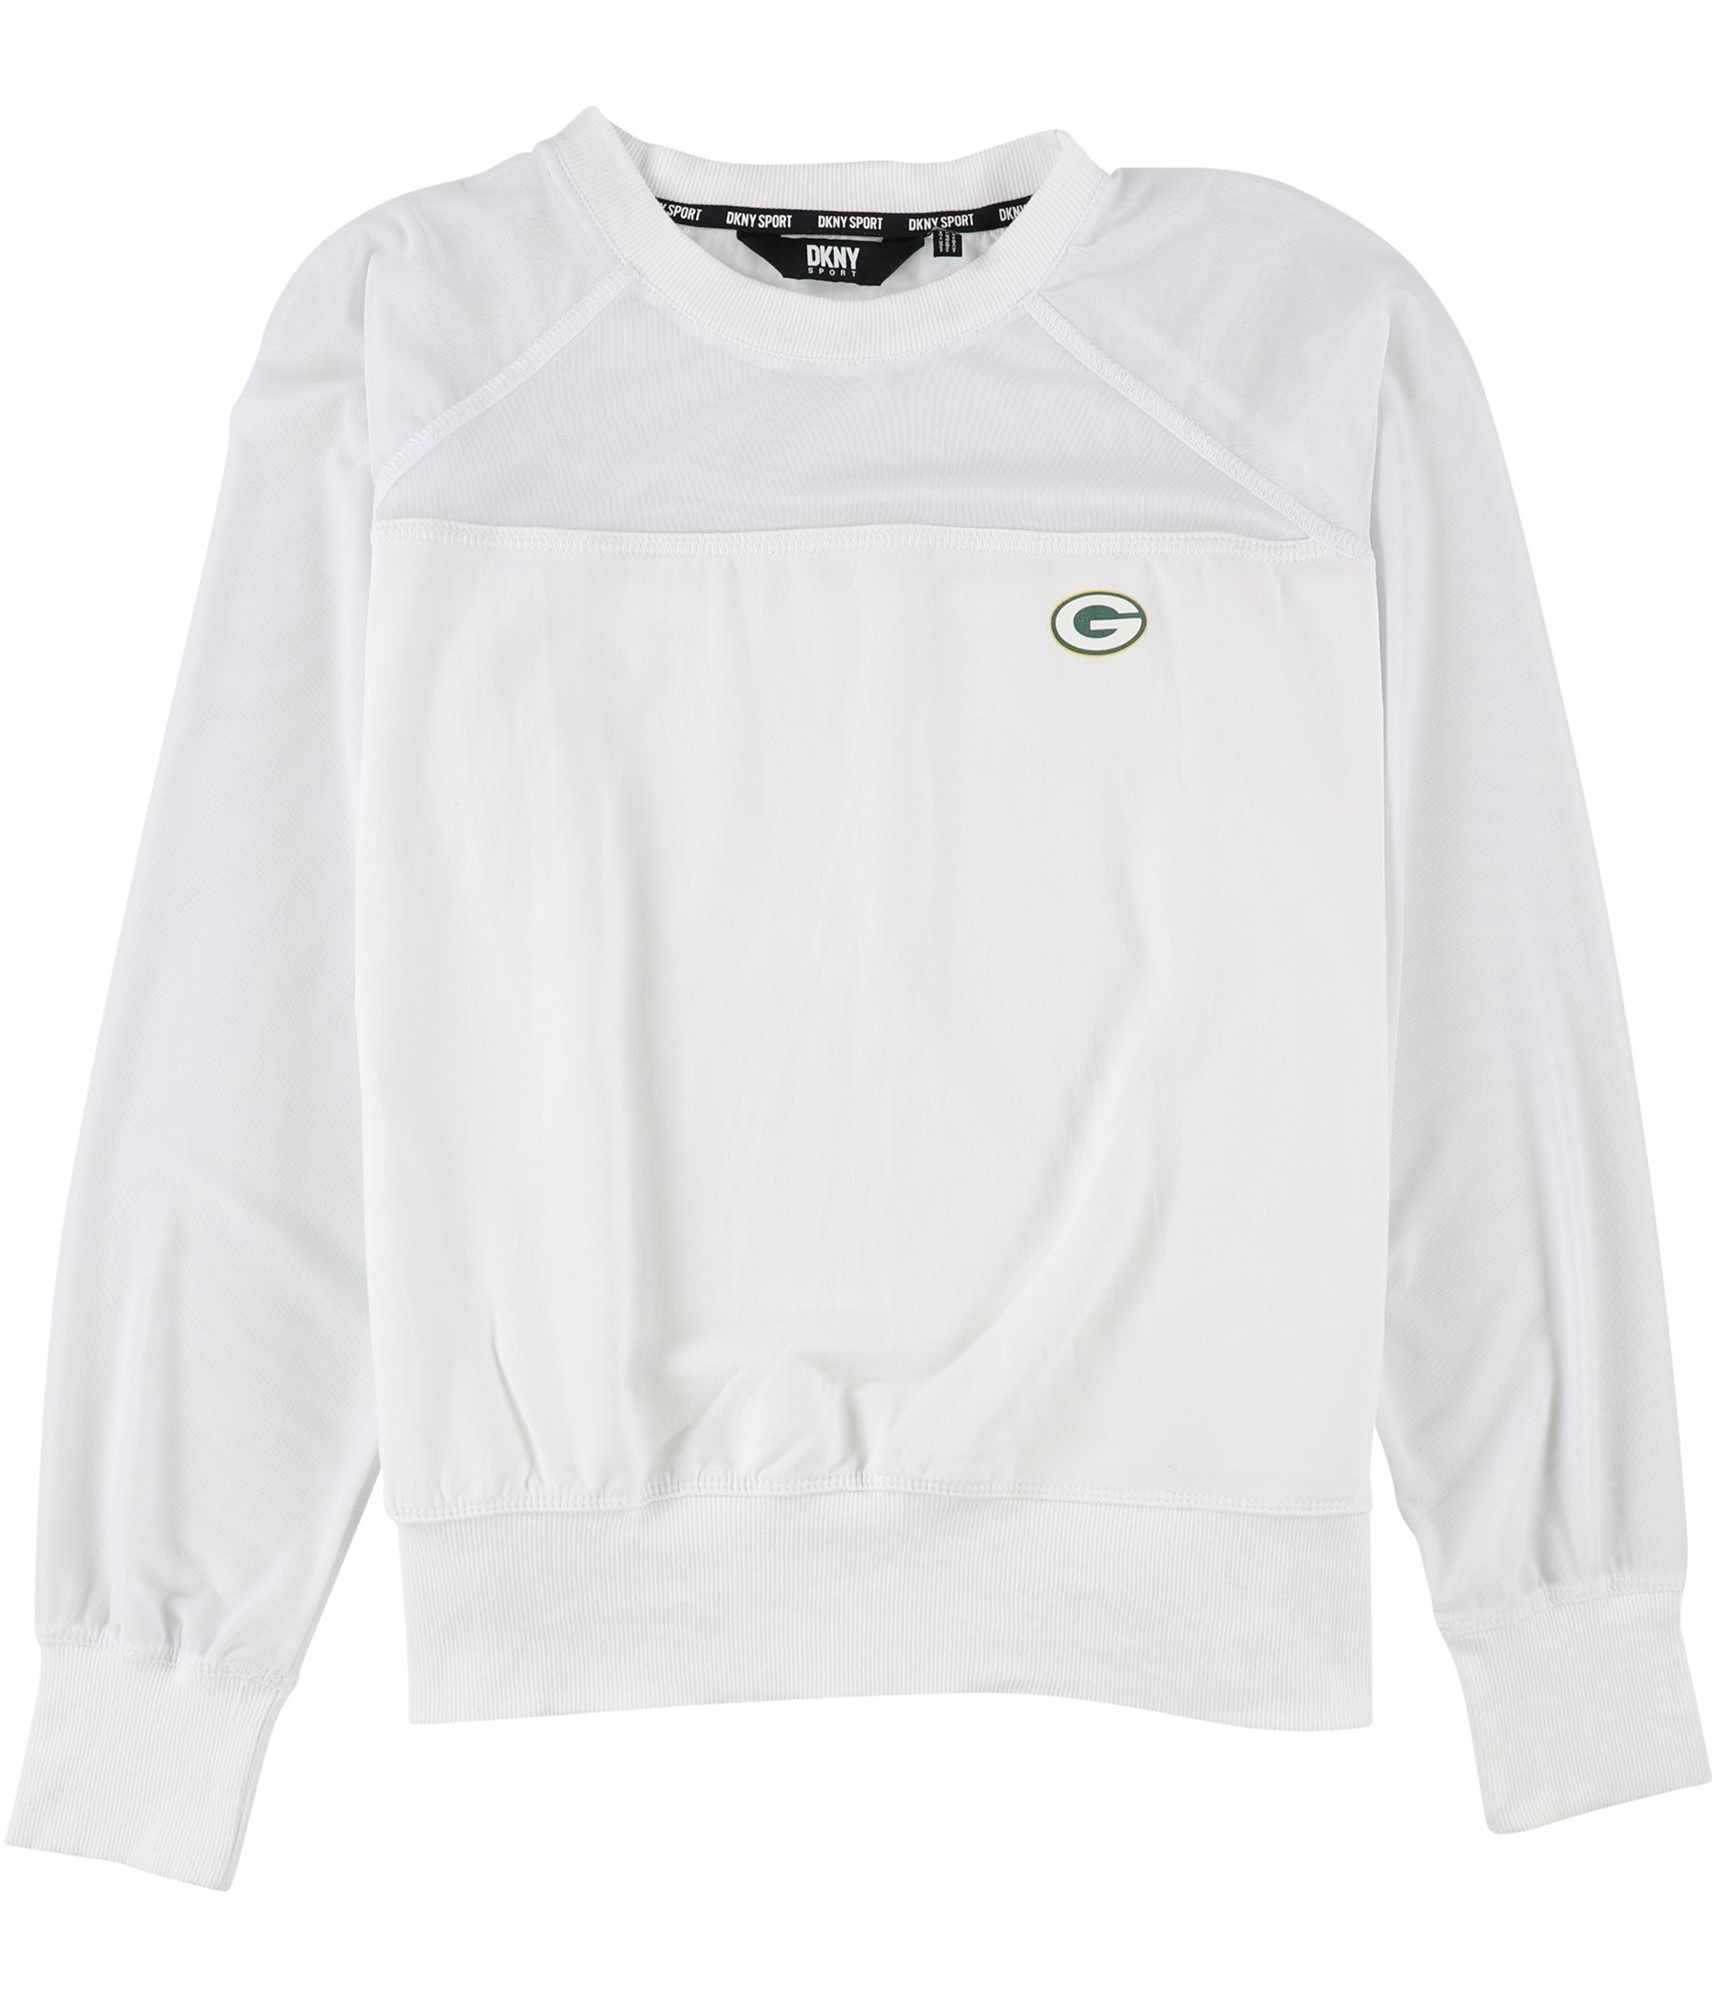 Buy a Dkny Womens Green Bay Packers Graphic T-Shirt | Tagsweekly